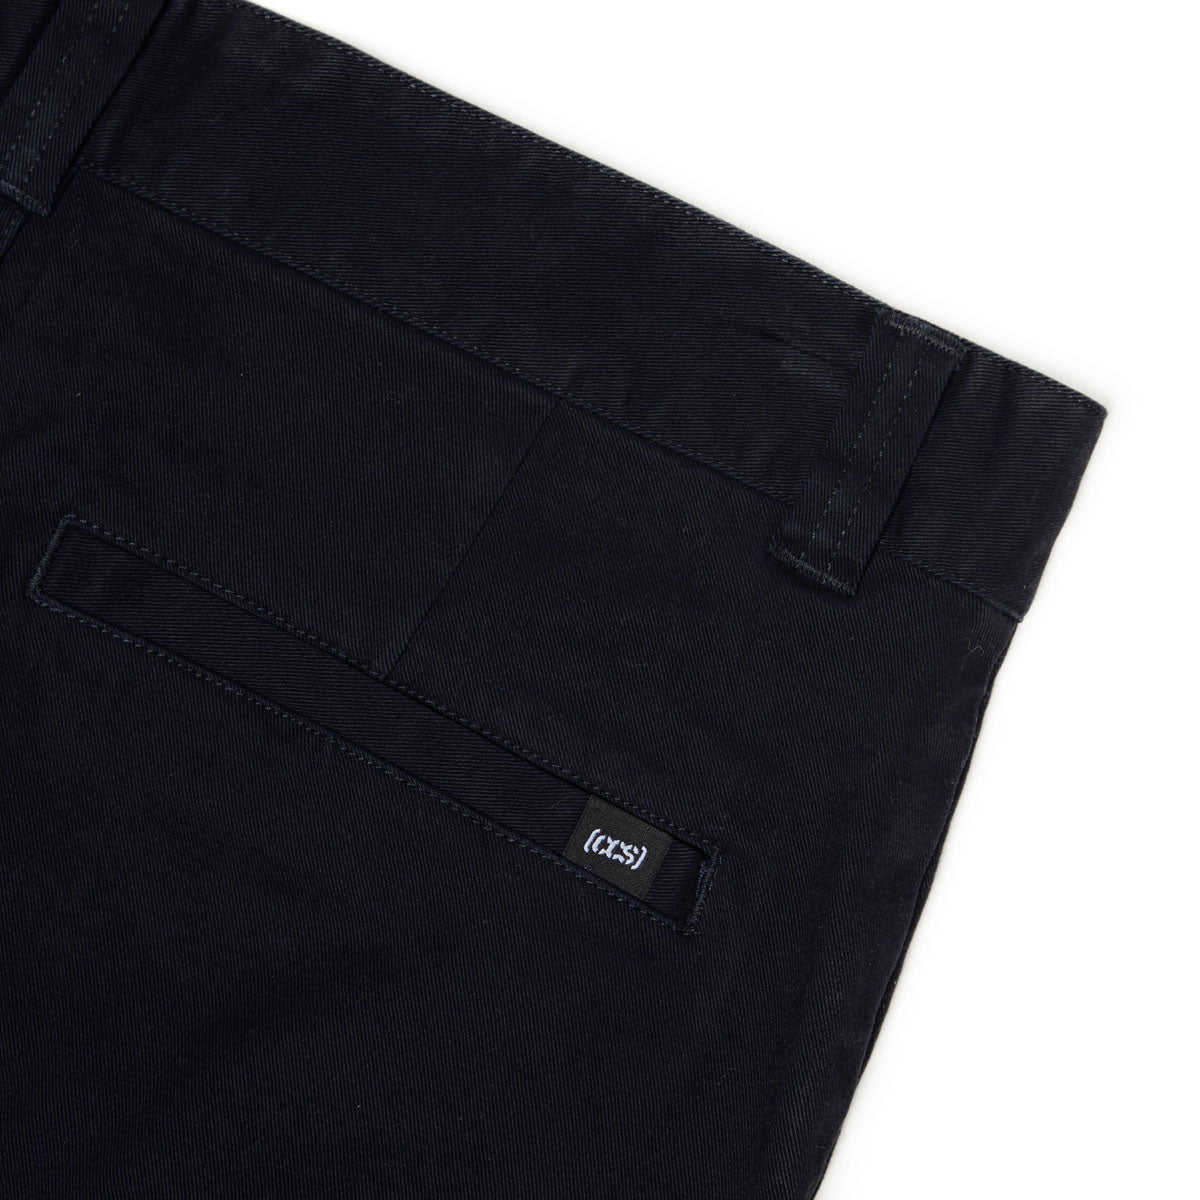 CCS Standard Plus Relaxed Chino Pants - Navy image 6